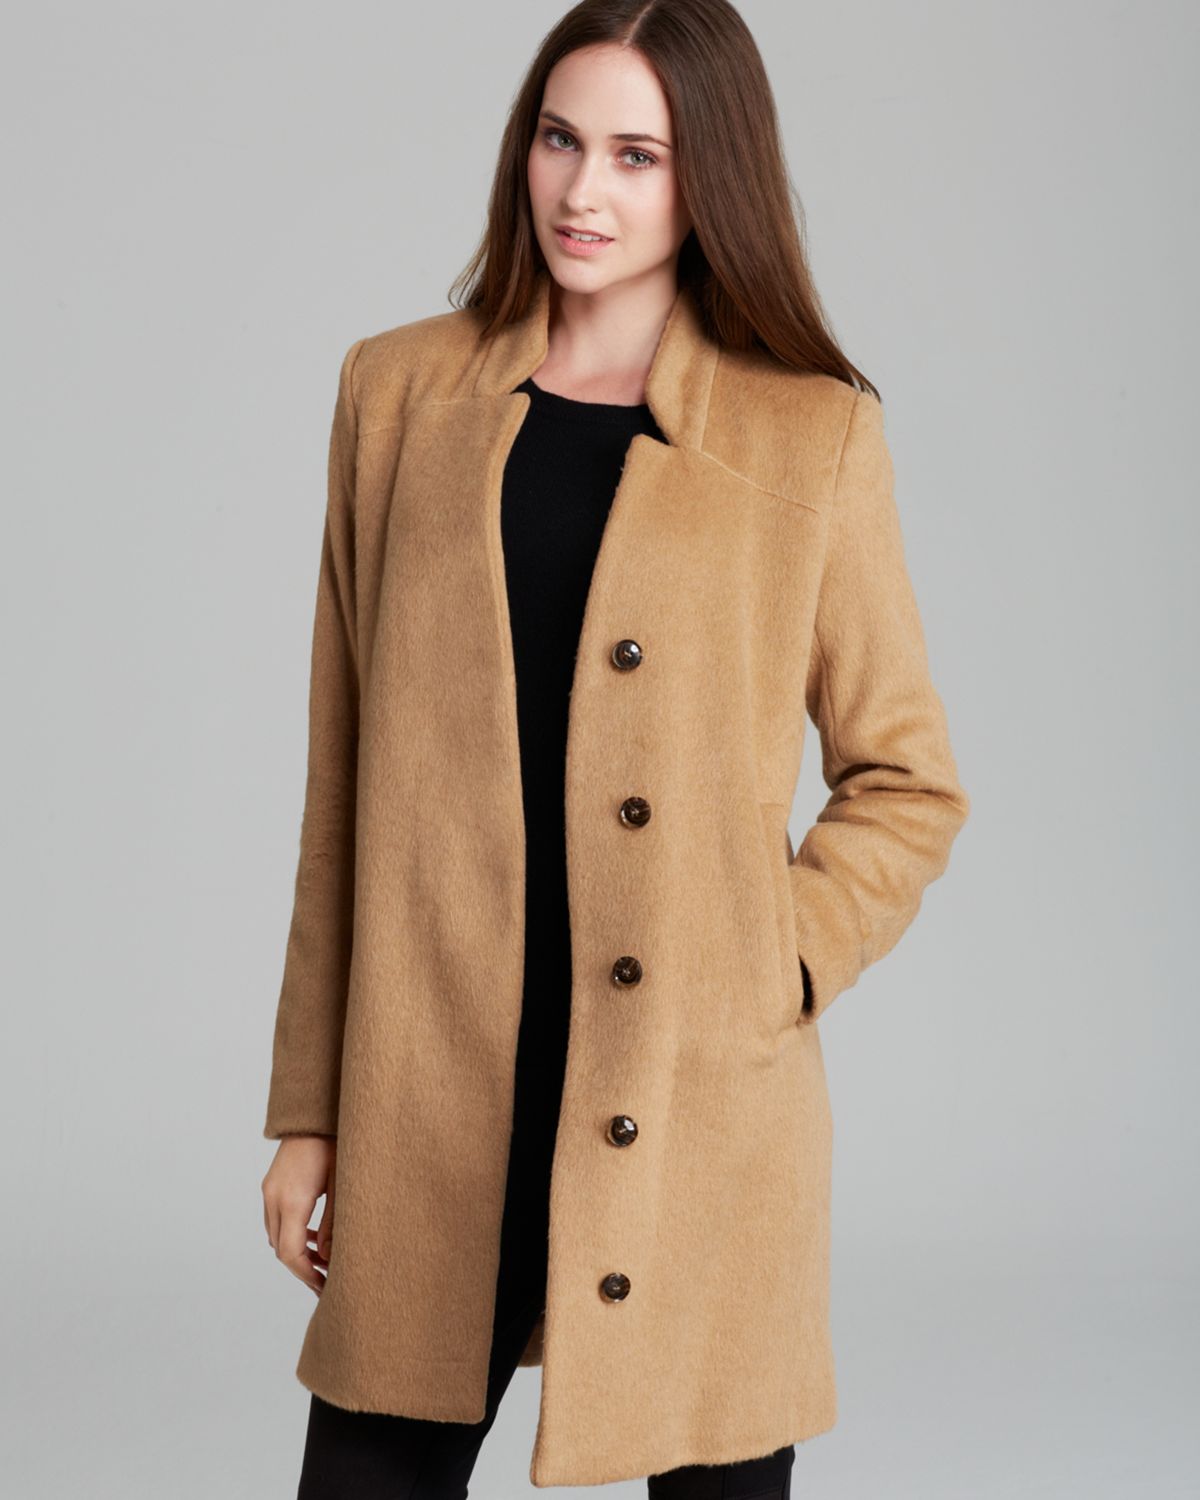 Lyst - French connection Coat Divine Dorothy in Natural